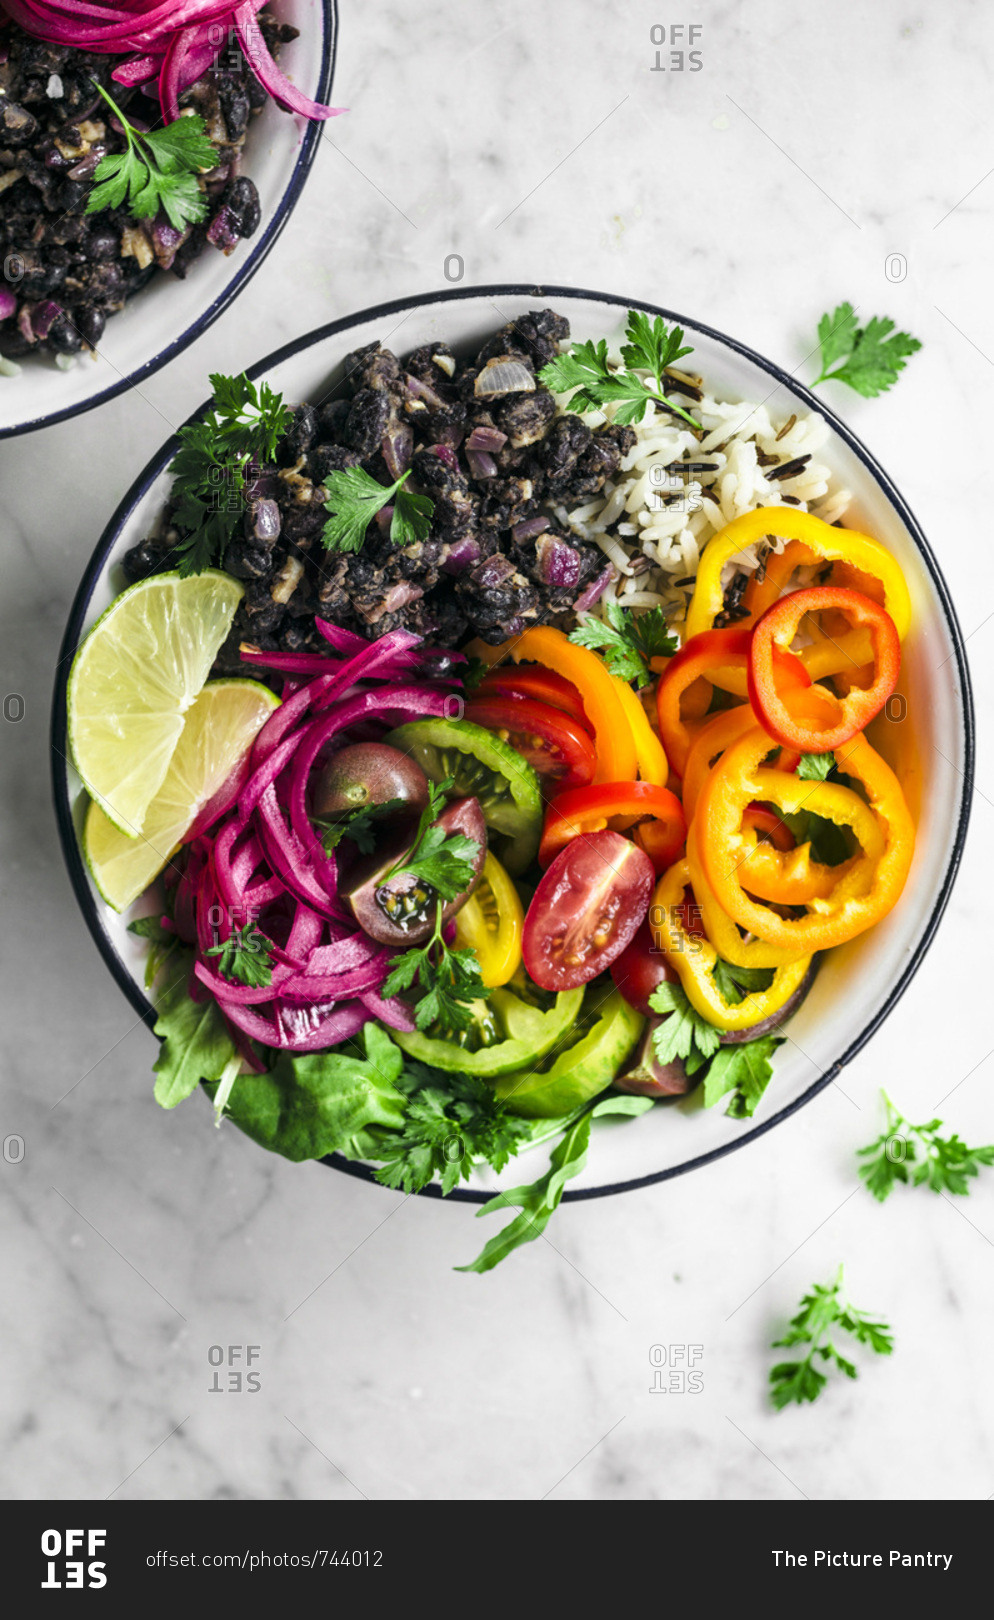 Vegan burrito bowls with spicy black beans, rice, summer vegetables, and pickled onions